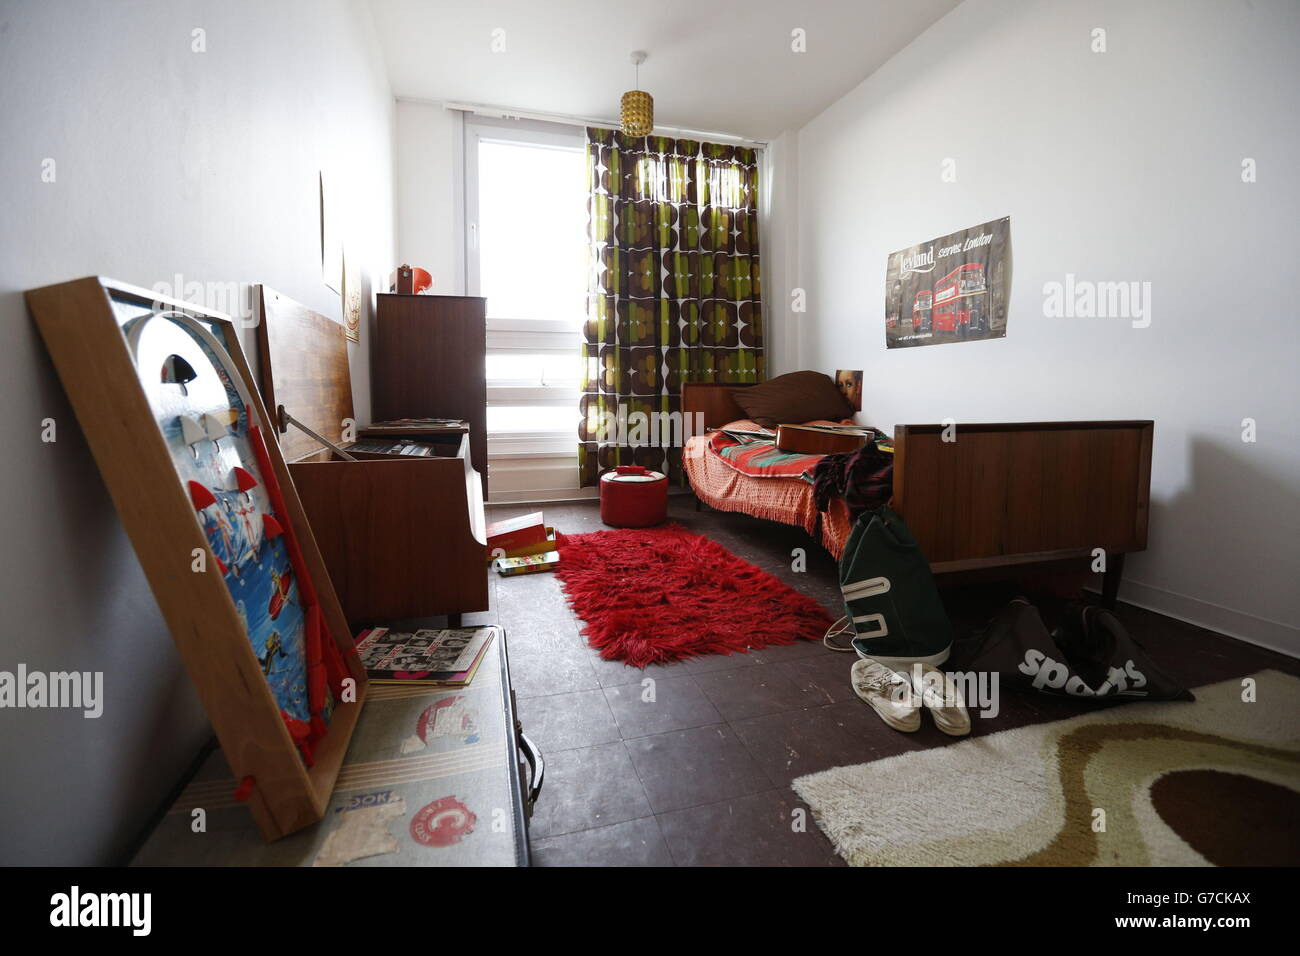 Interior view of a bedroom in Flat 130 at the Balfron Tower, St. Leonard's Road, Poplar, London, as the National Trust have furnished the flat, where architect Erno Goldfinger lived for two months in 1968, as it would have appeared at the time. Stock Photo